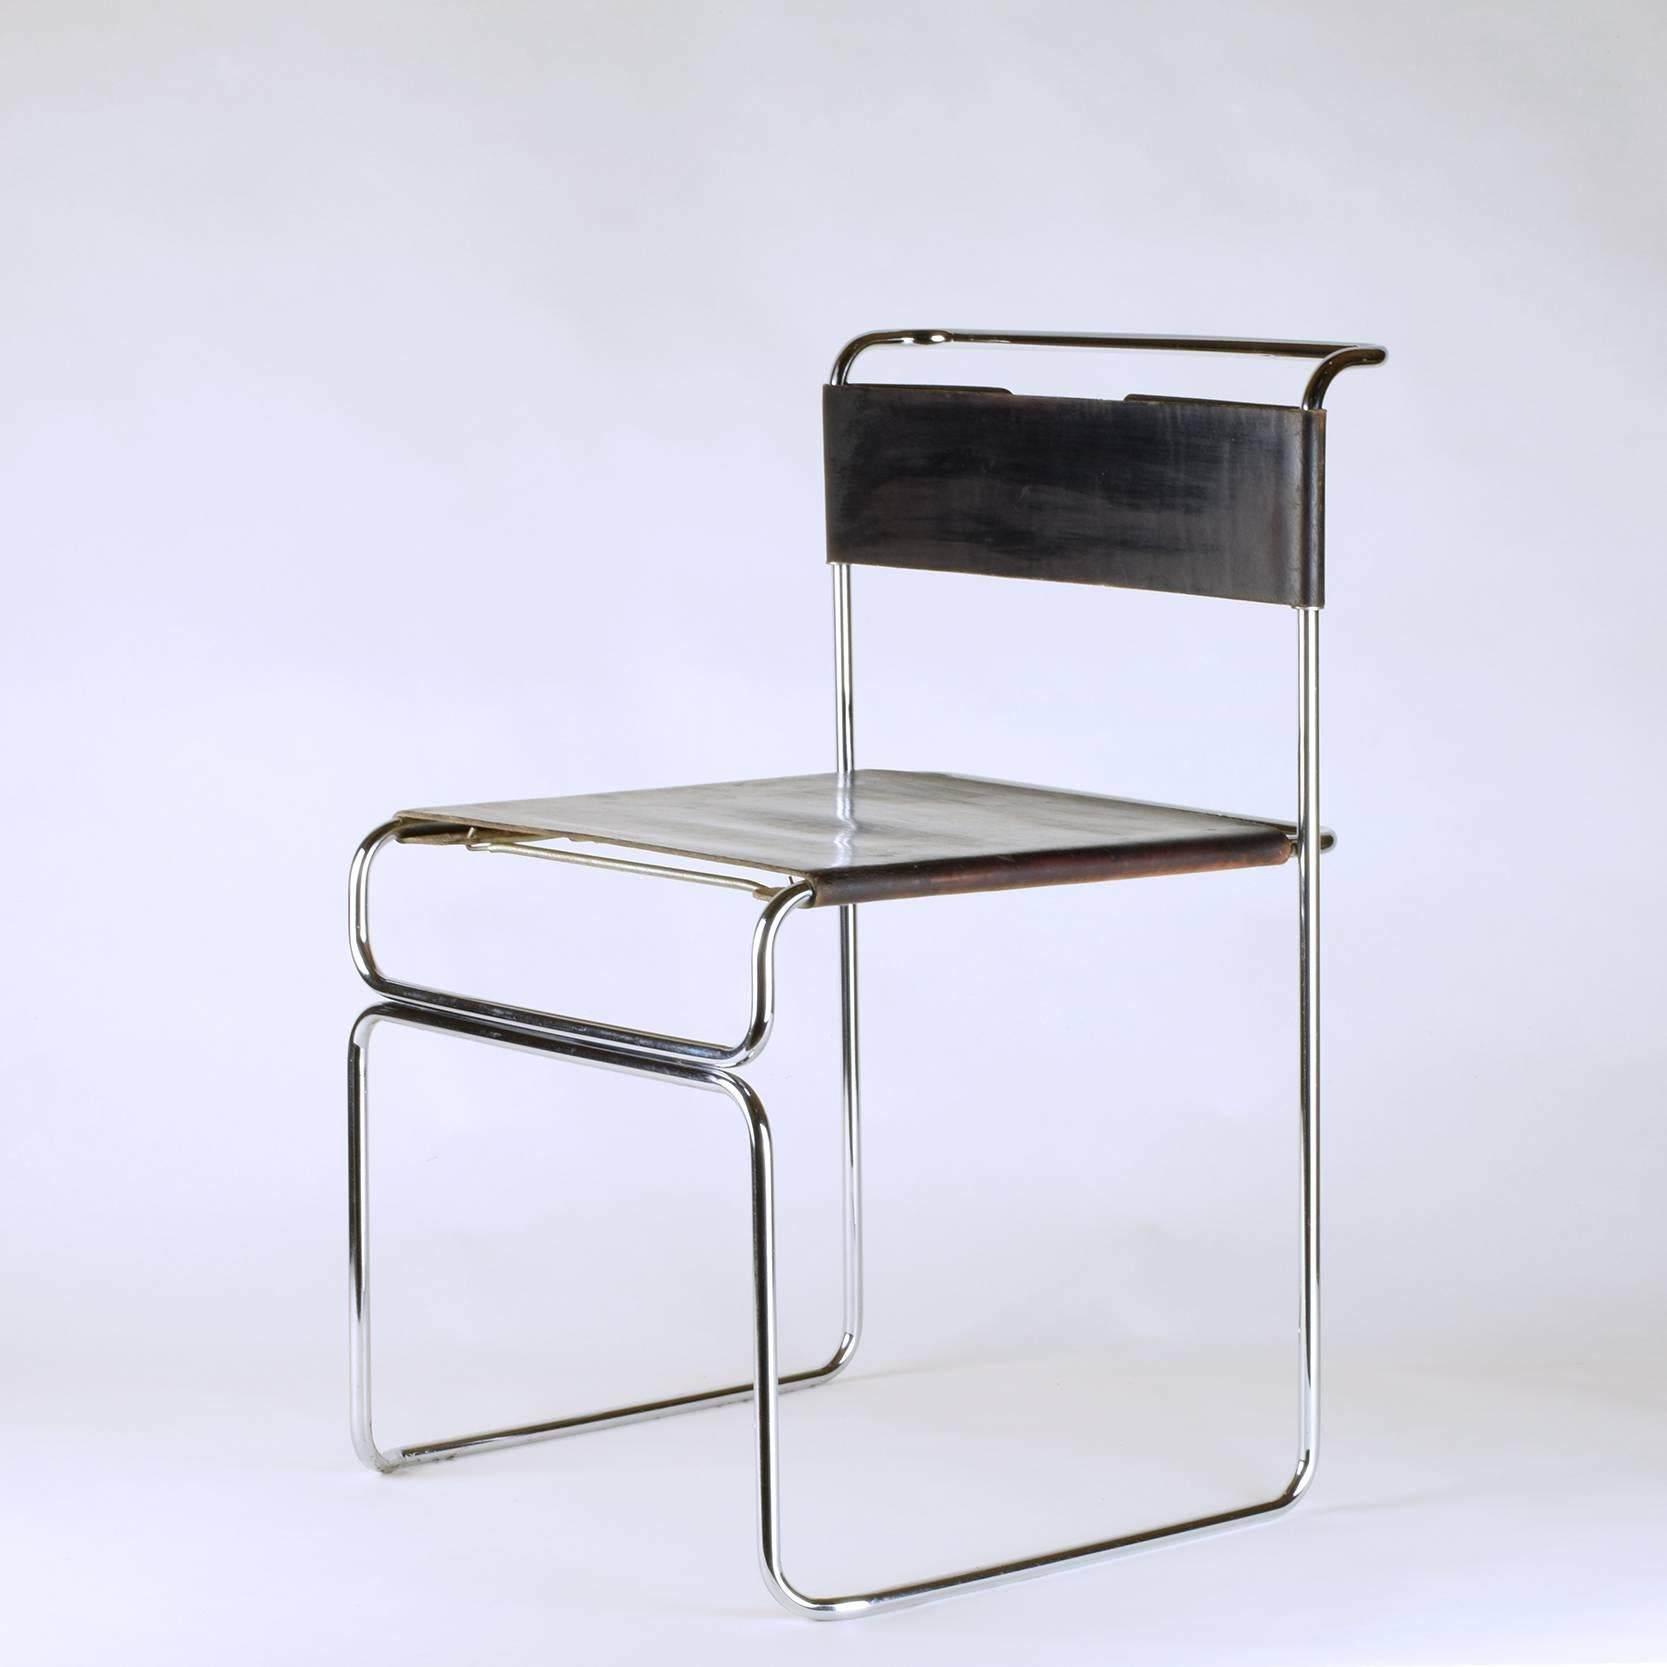 Giovanni Carini
Planula (manufacturer), Italy

Side chair, circa 1970

Chrome-plated steel, dark-brown leather

A homage to the modernist designs of the likes of Marcel Breuer and Mies Van Der Rohe, this is a beautiful and unusual chair.